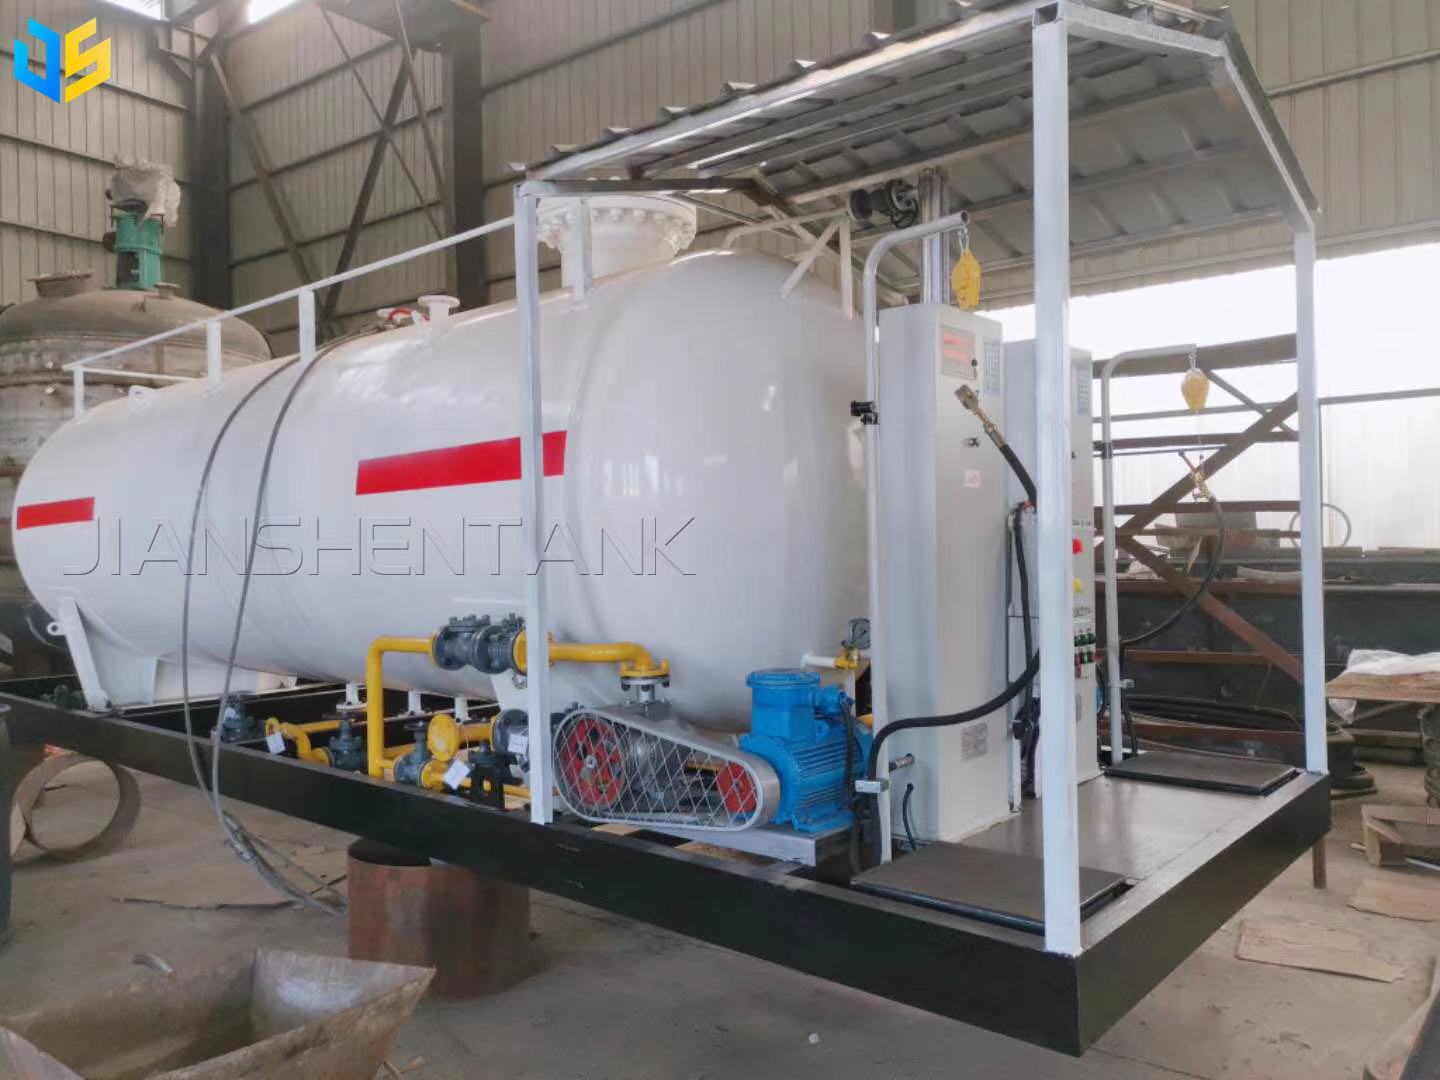 Customized liquefied gas storage tank manufacturer Project handover and acceptance